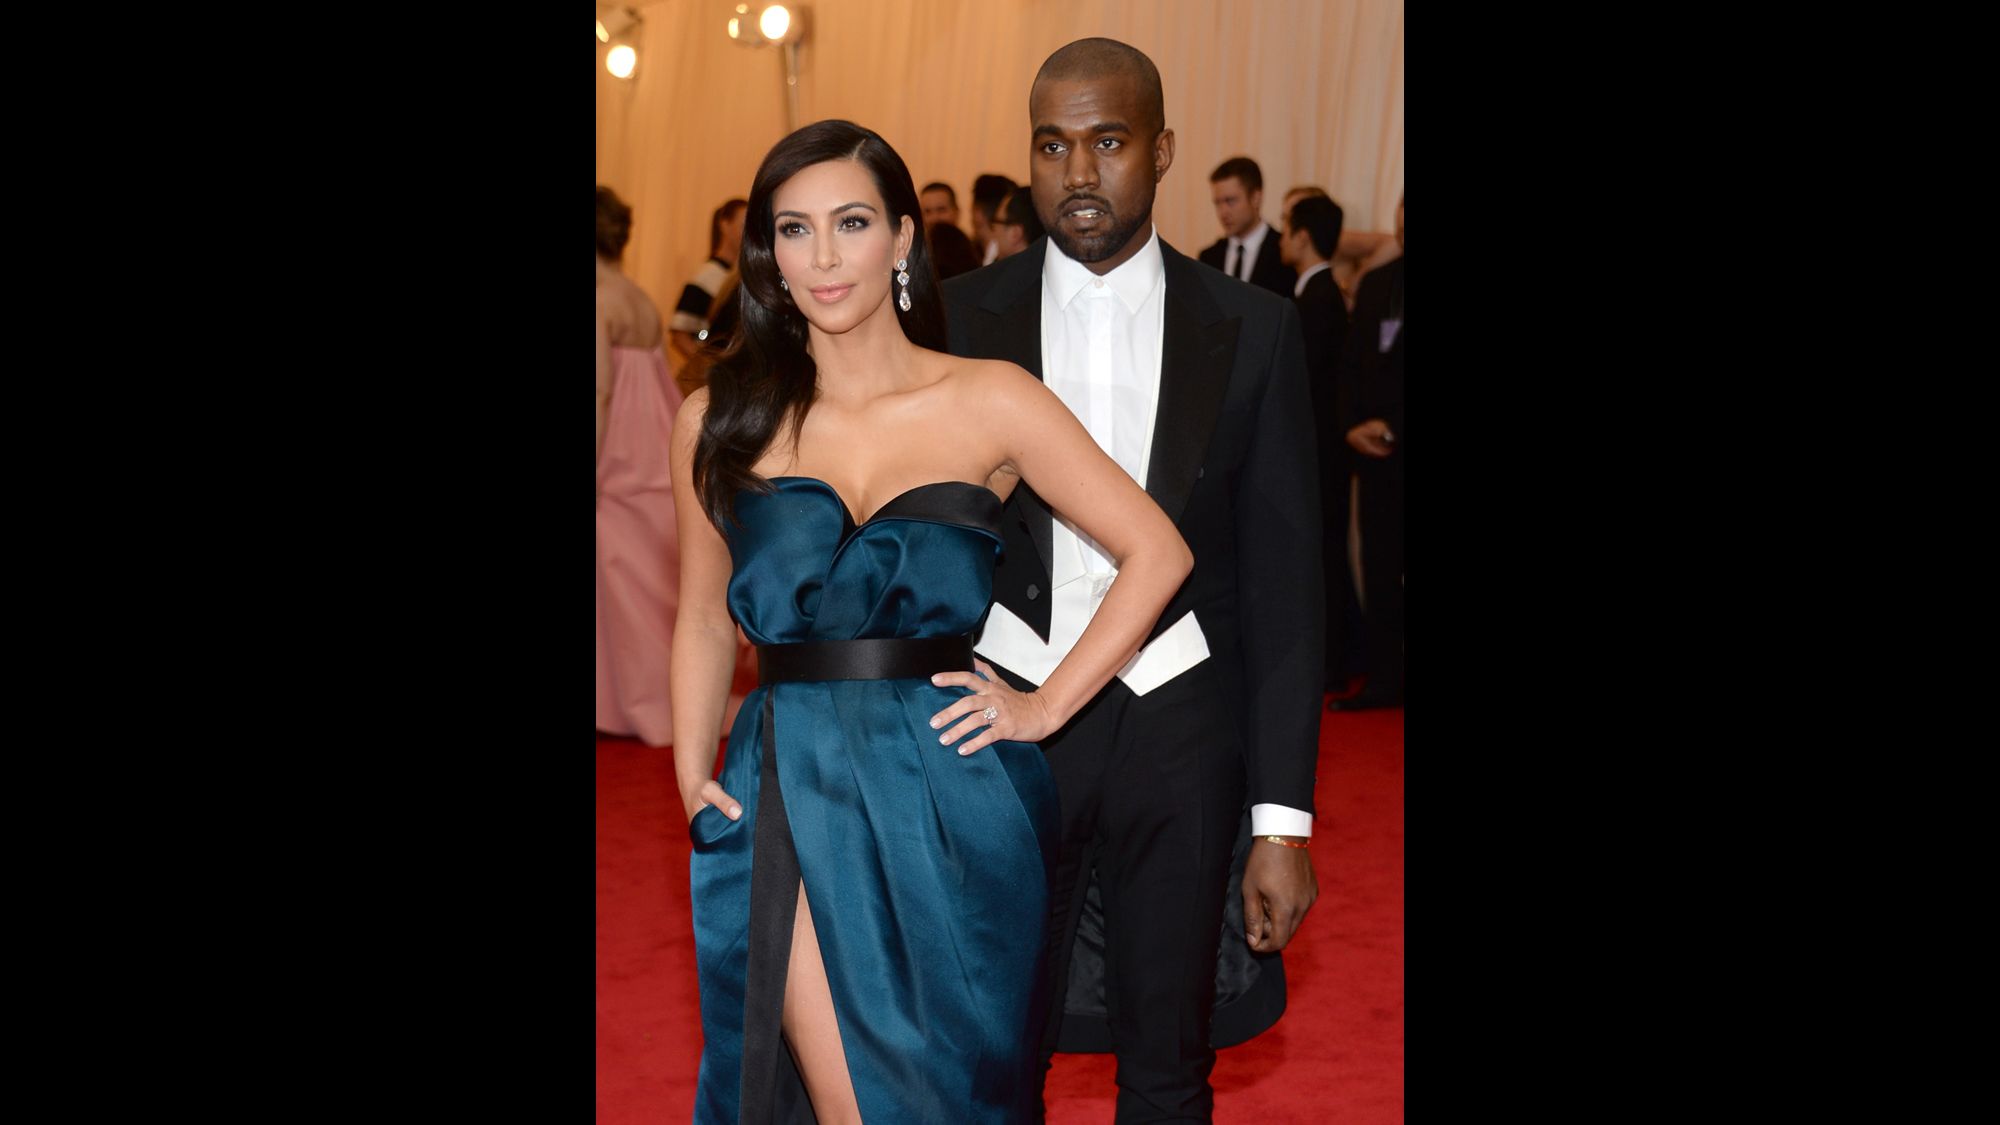 Met Gala 2014: Red carpet arrivals - India Today